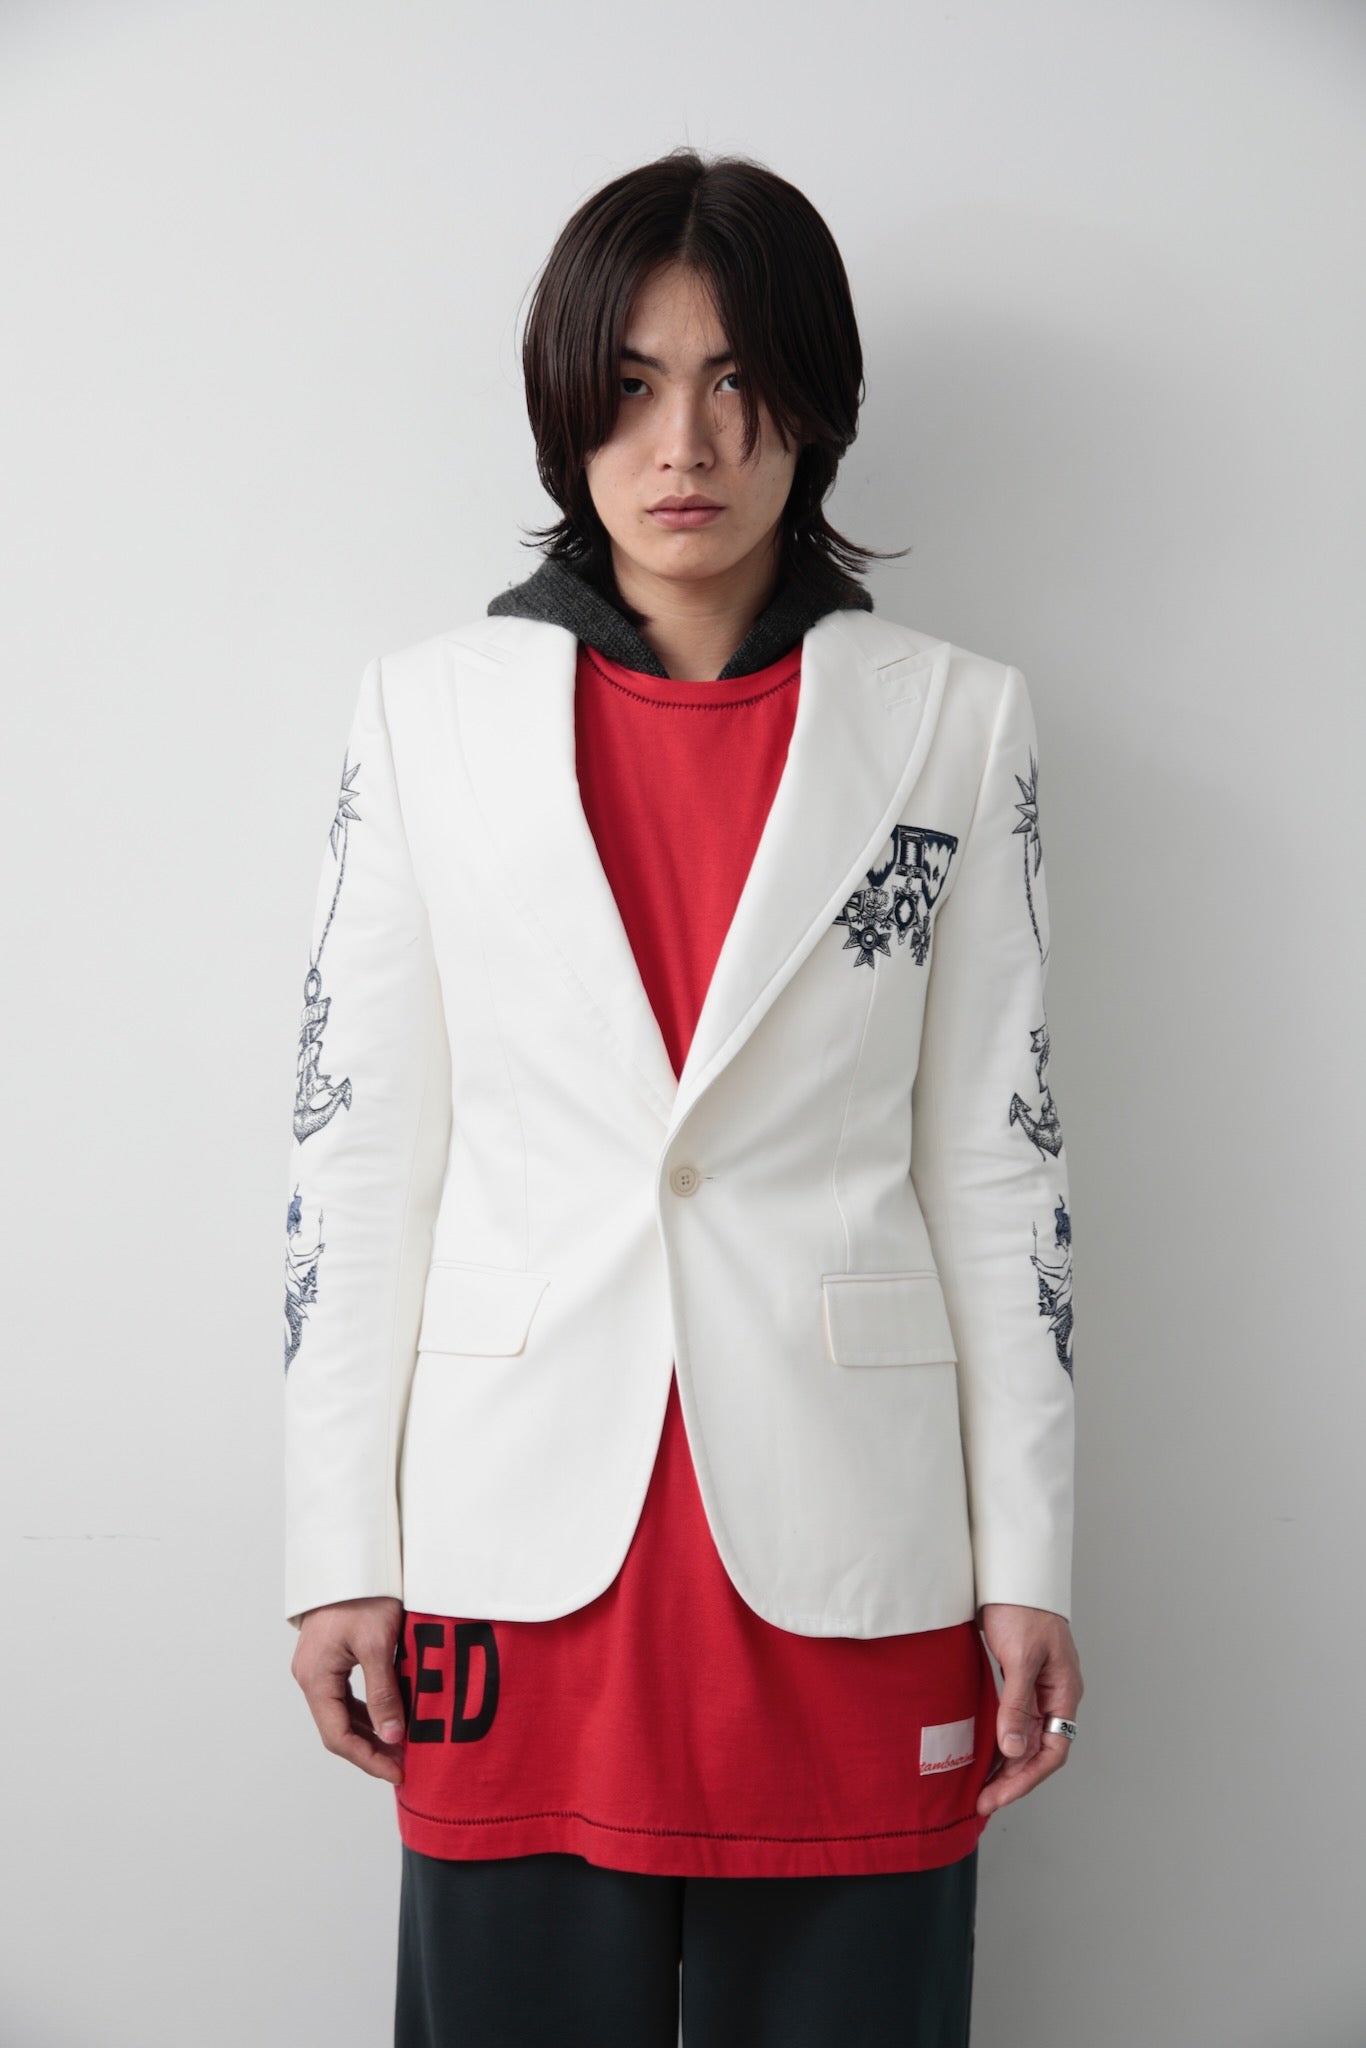 2000s ALEXANDER MCQUEEN EMBROIDERY TAILORED JACKET